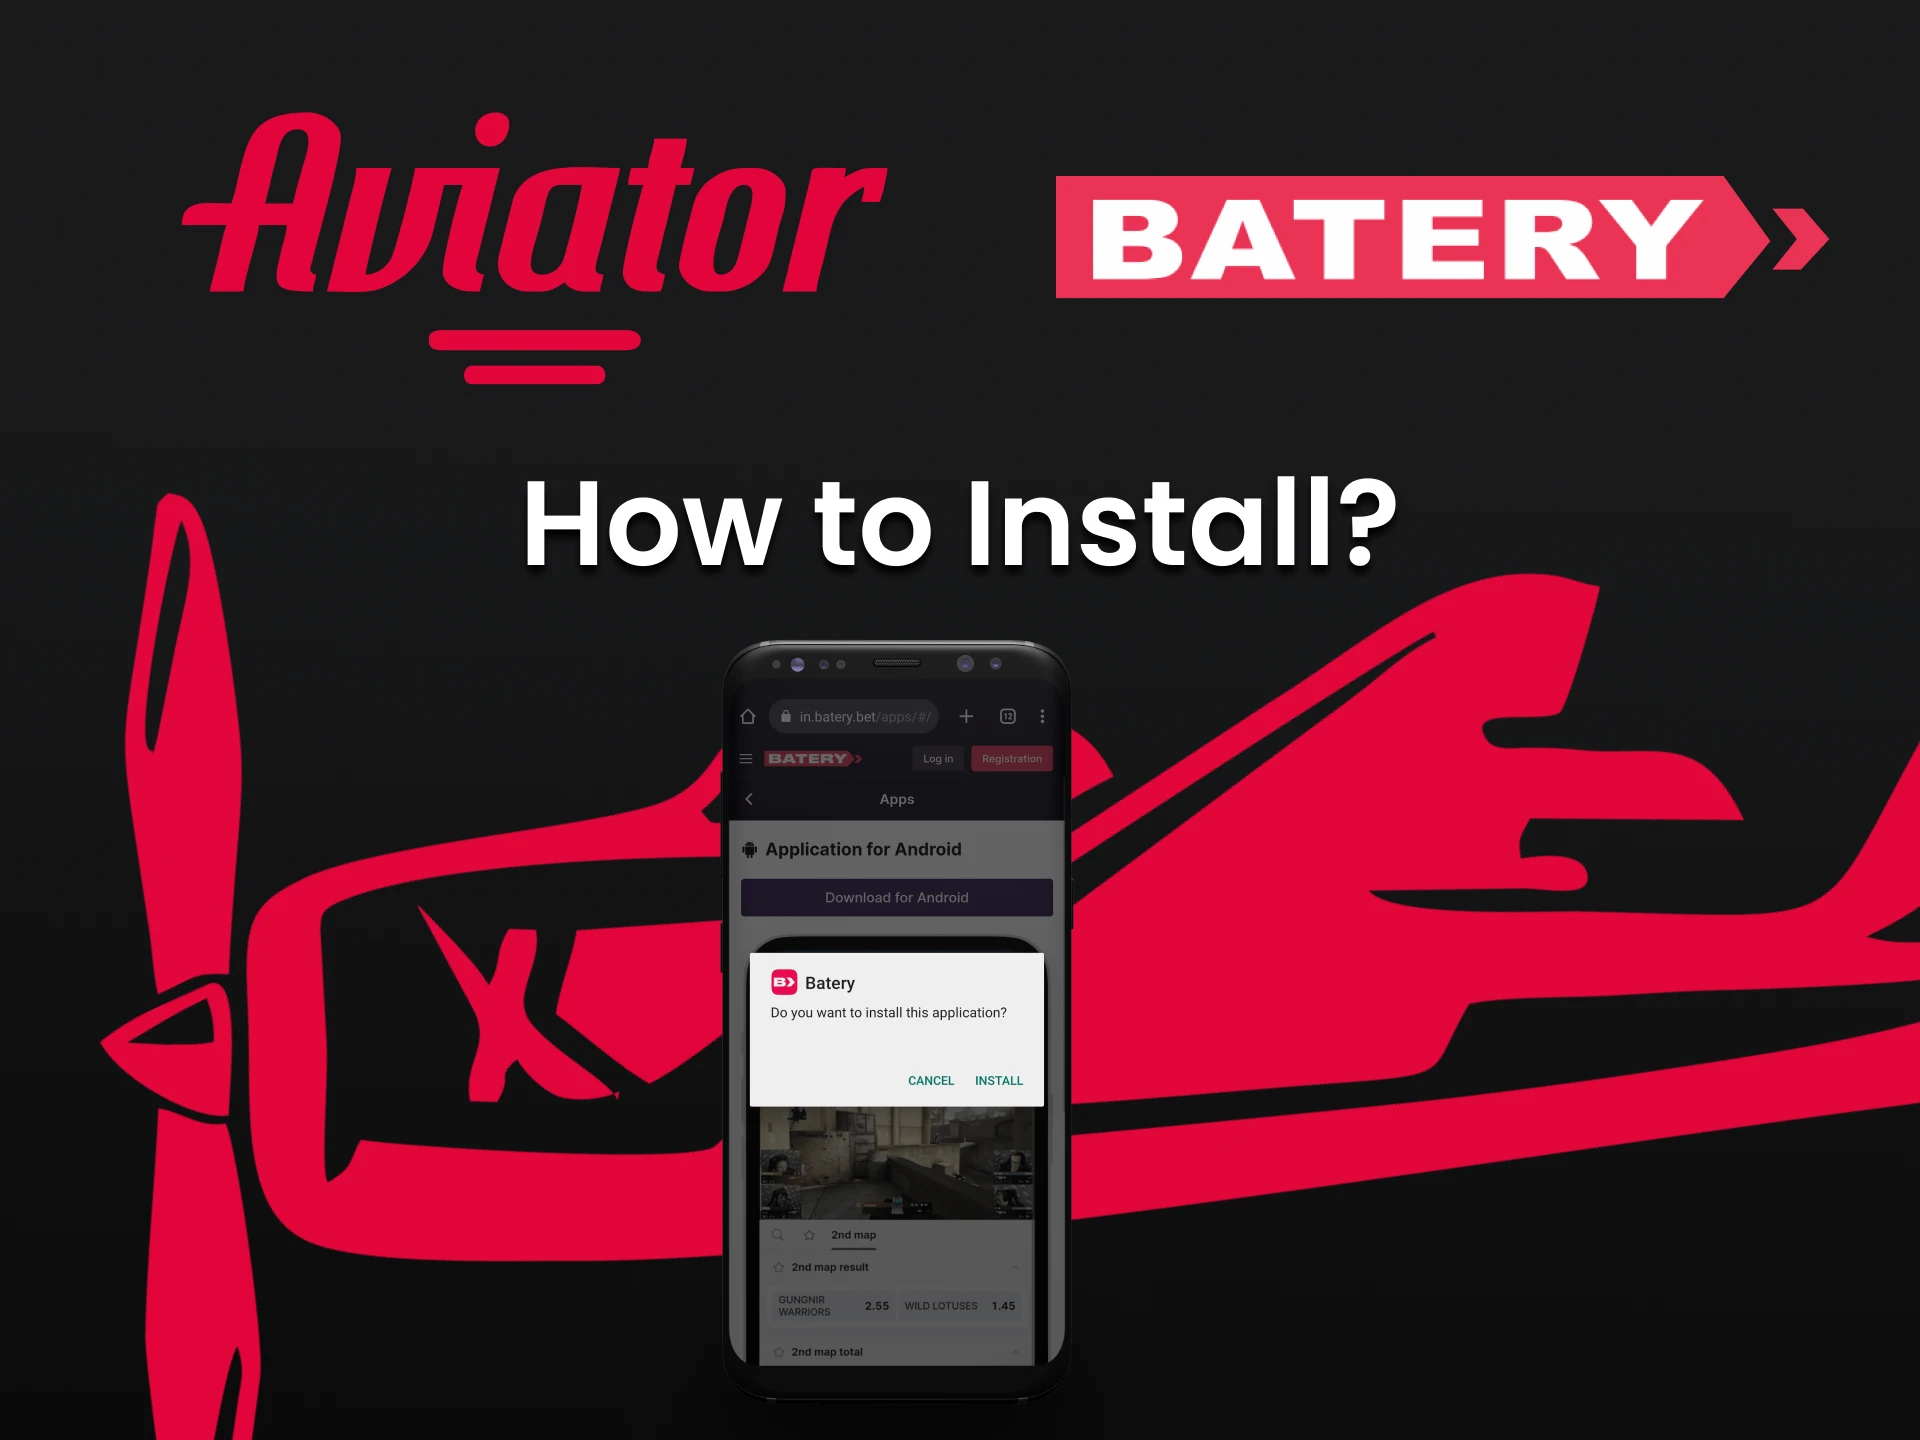 Install the Batery app to play Aviator.